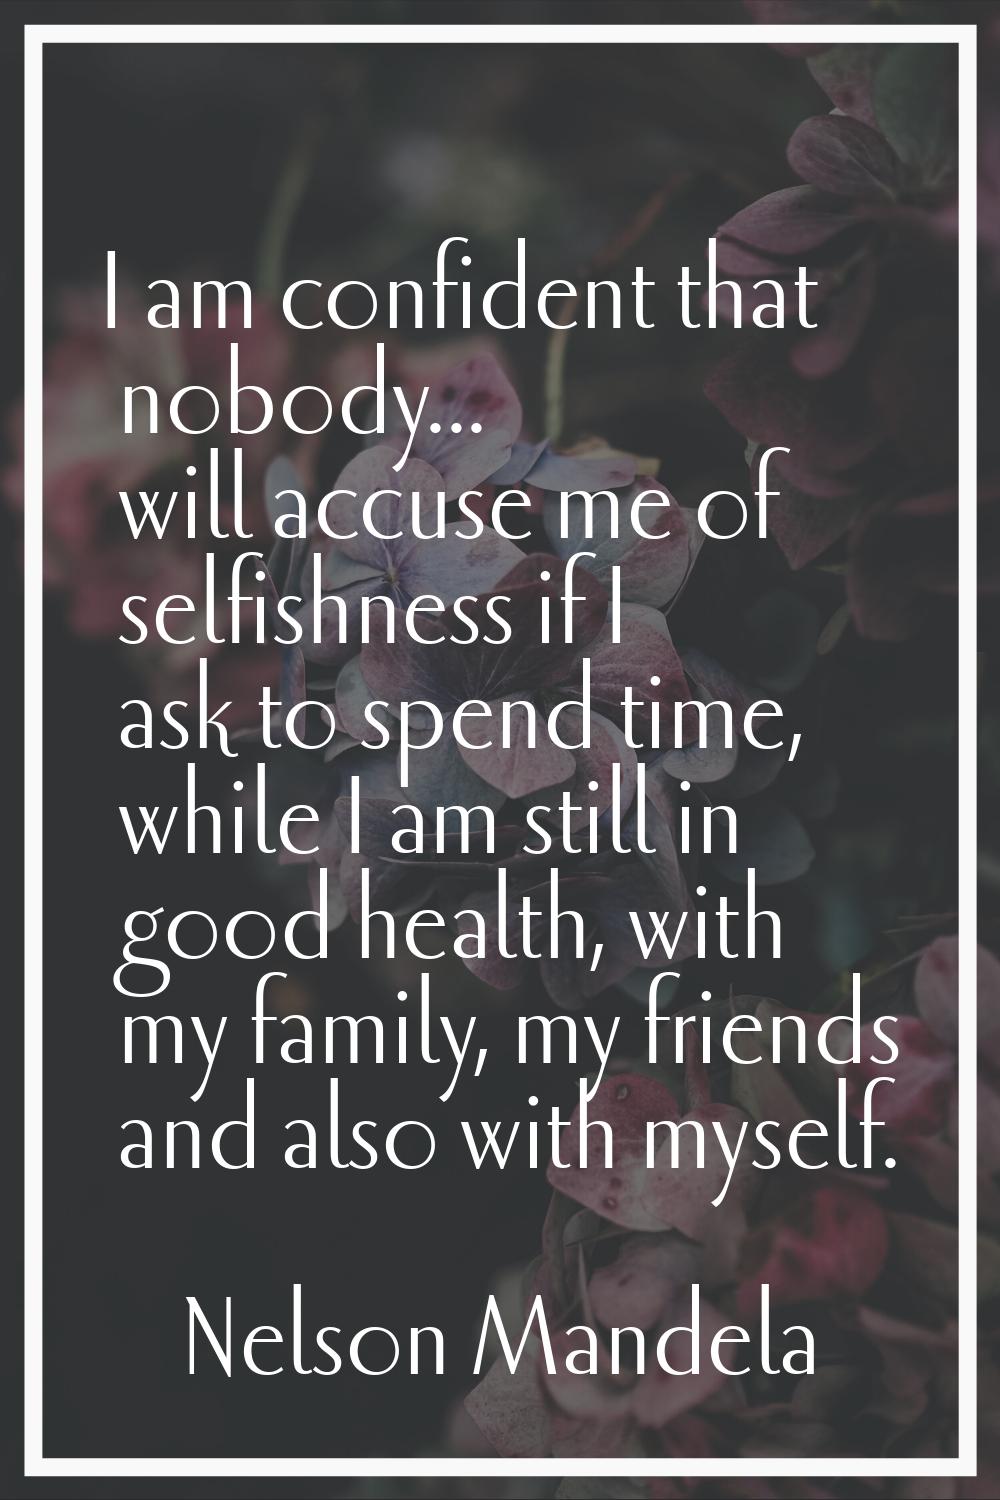 I am confident that nobody... will accuse me of selfishness if I ask to spend time, while I am stil